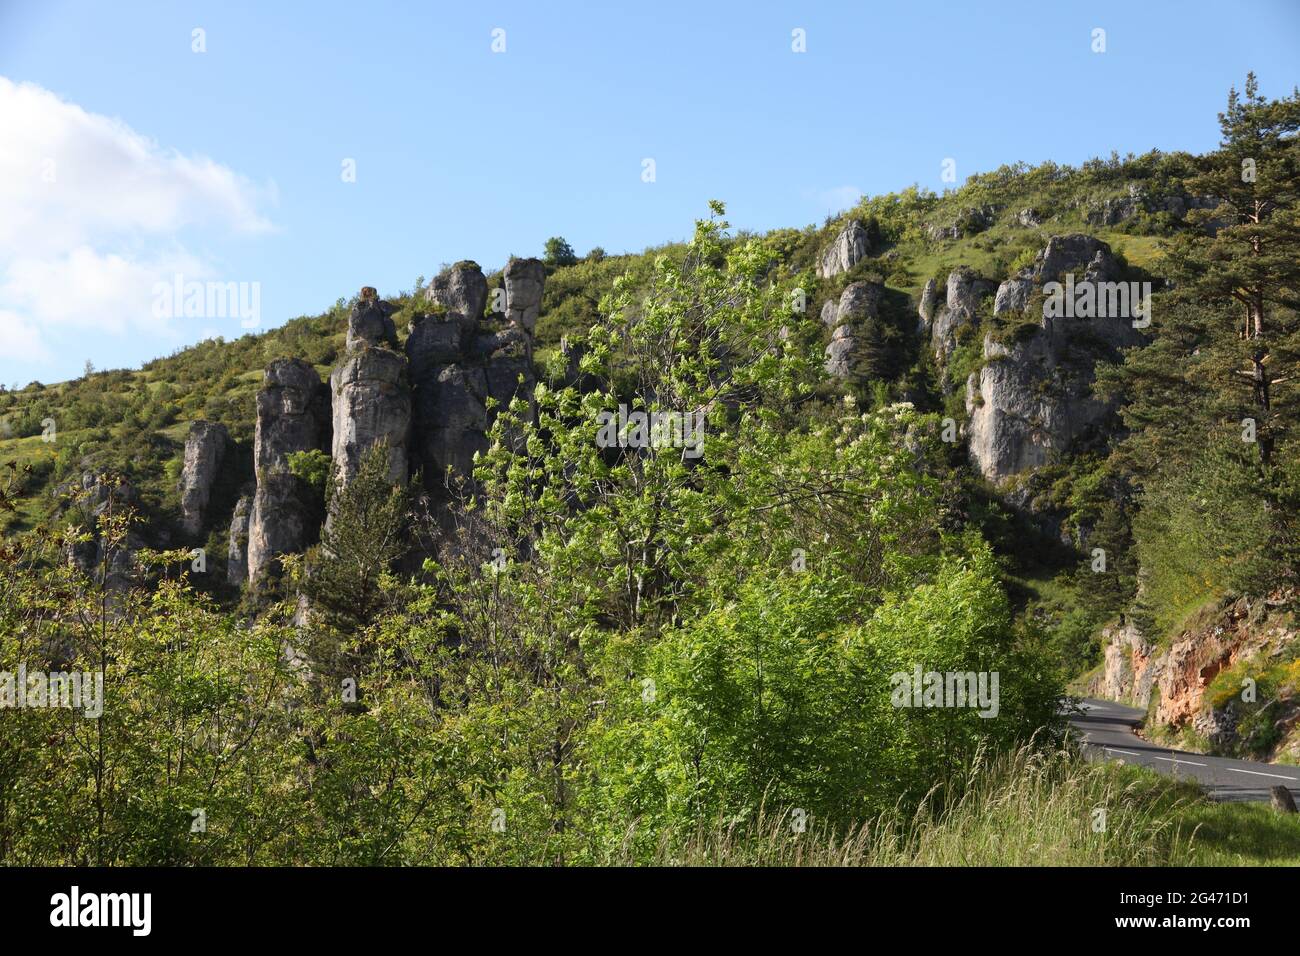 Chaos of Montpellier-le-Vieux limestone rock formations, Gorges of the Jonte and the Grands Causses, top Occitania site soon to be listed Grand Site of France Stock Photo